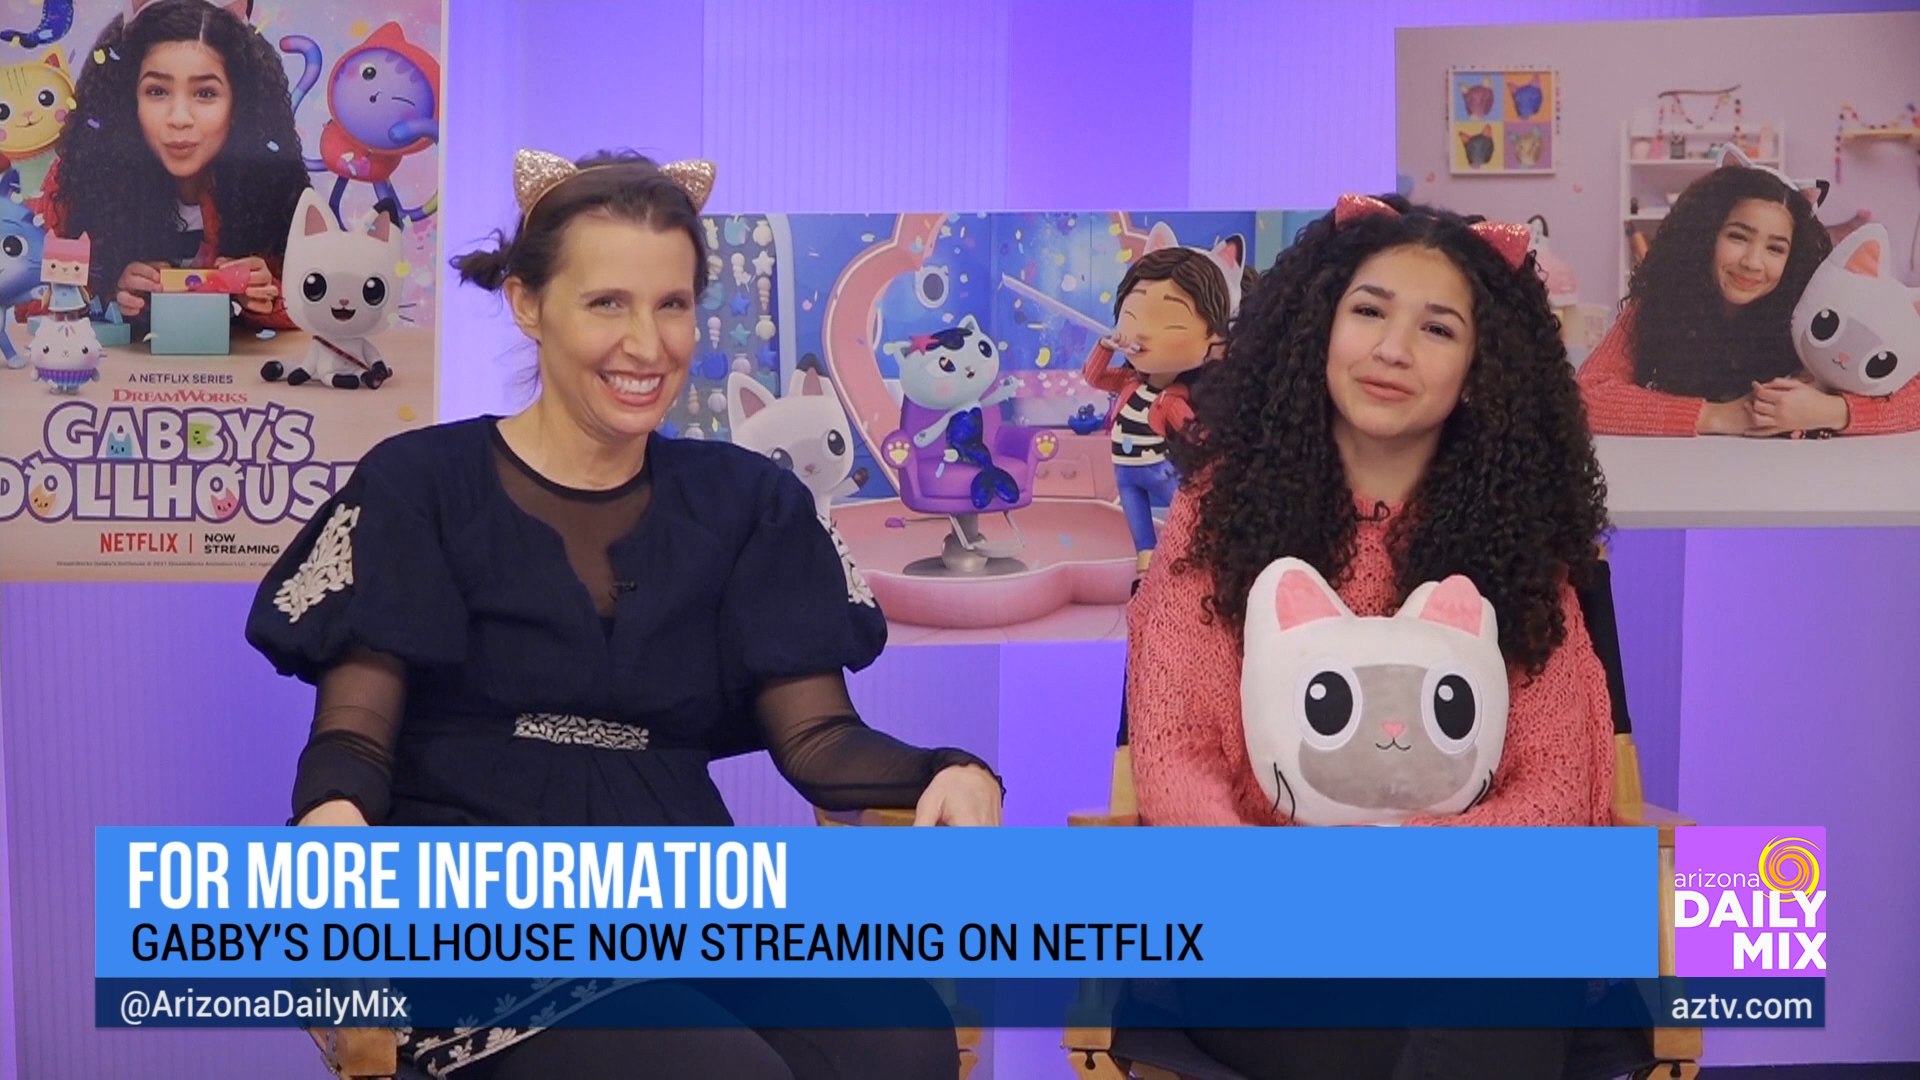 See the Trailer For Netflix's New Series, Gabby's Dollhouse